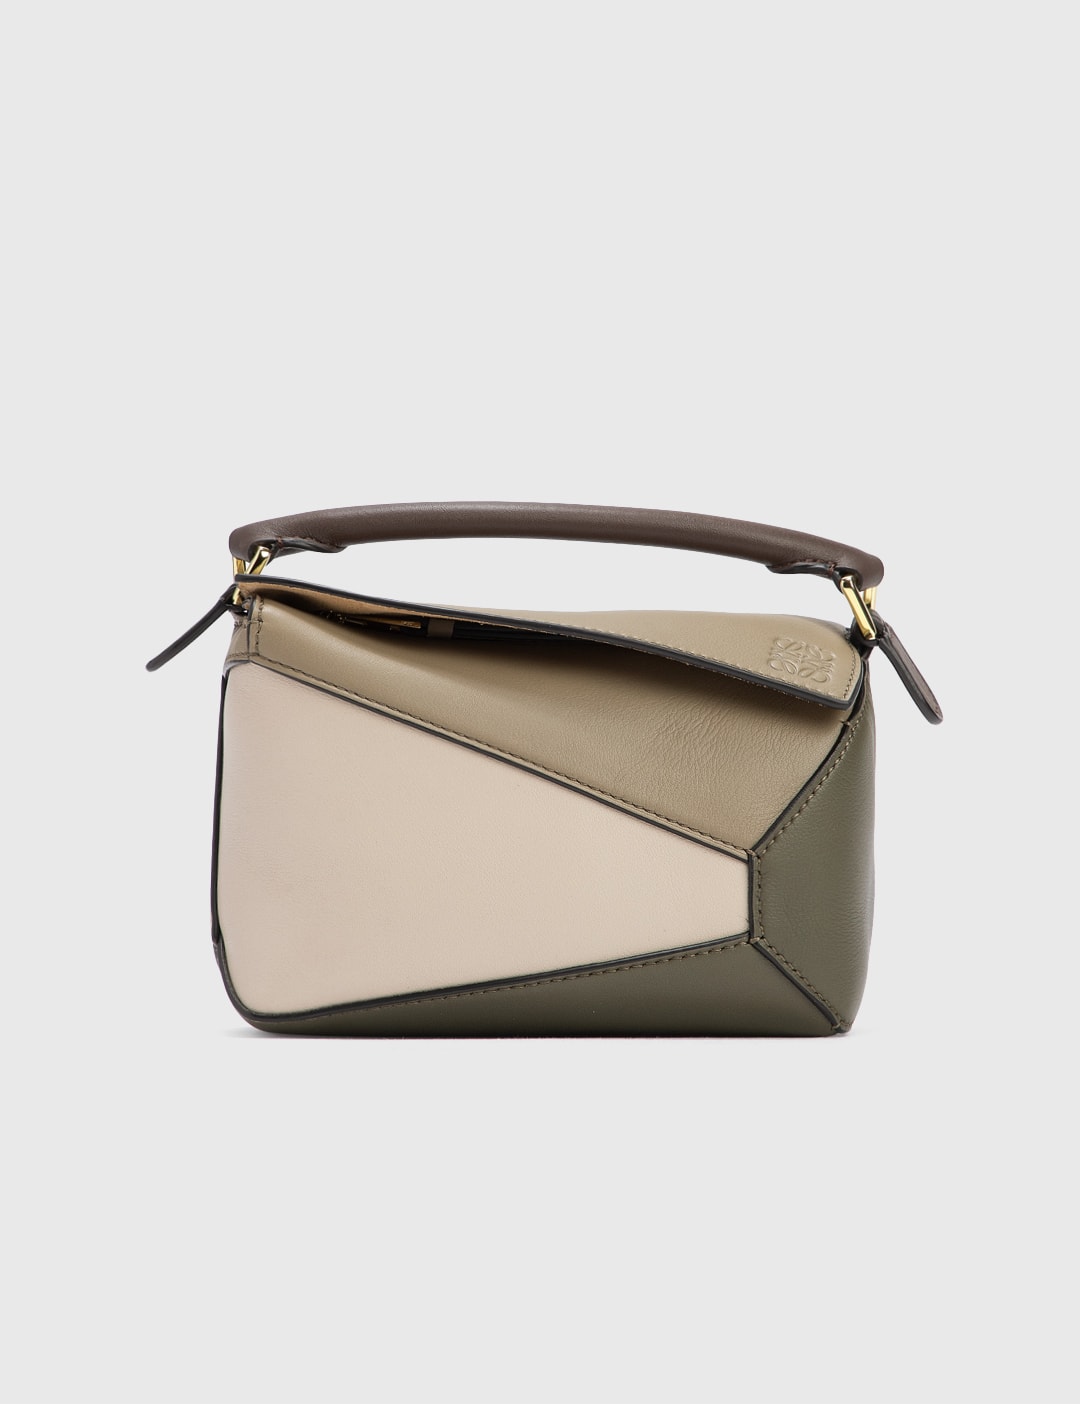 LOEWE Small Puzzle Bag in Classic Calfskin in Green/Light Oat